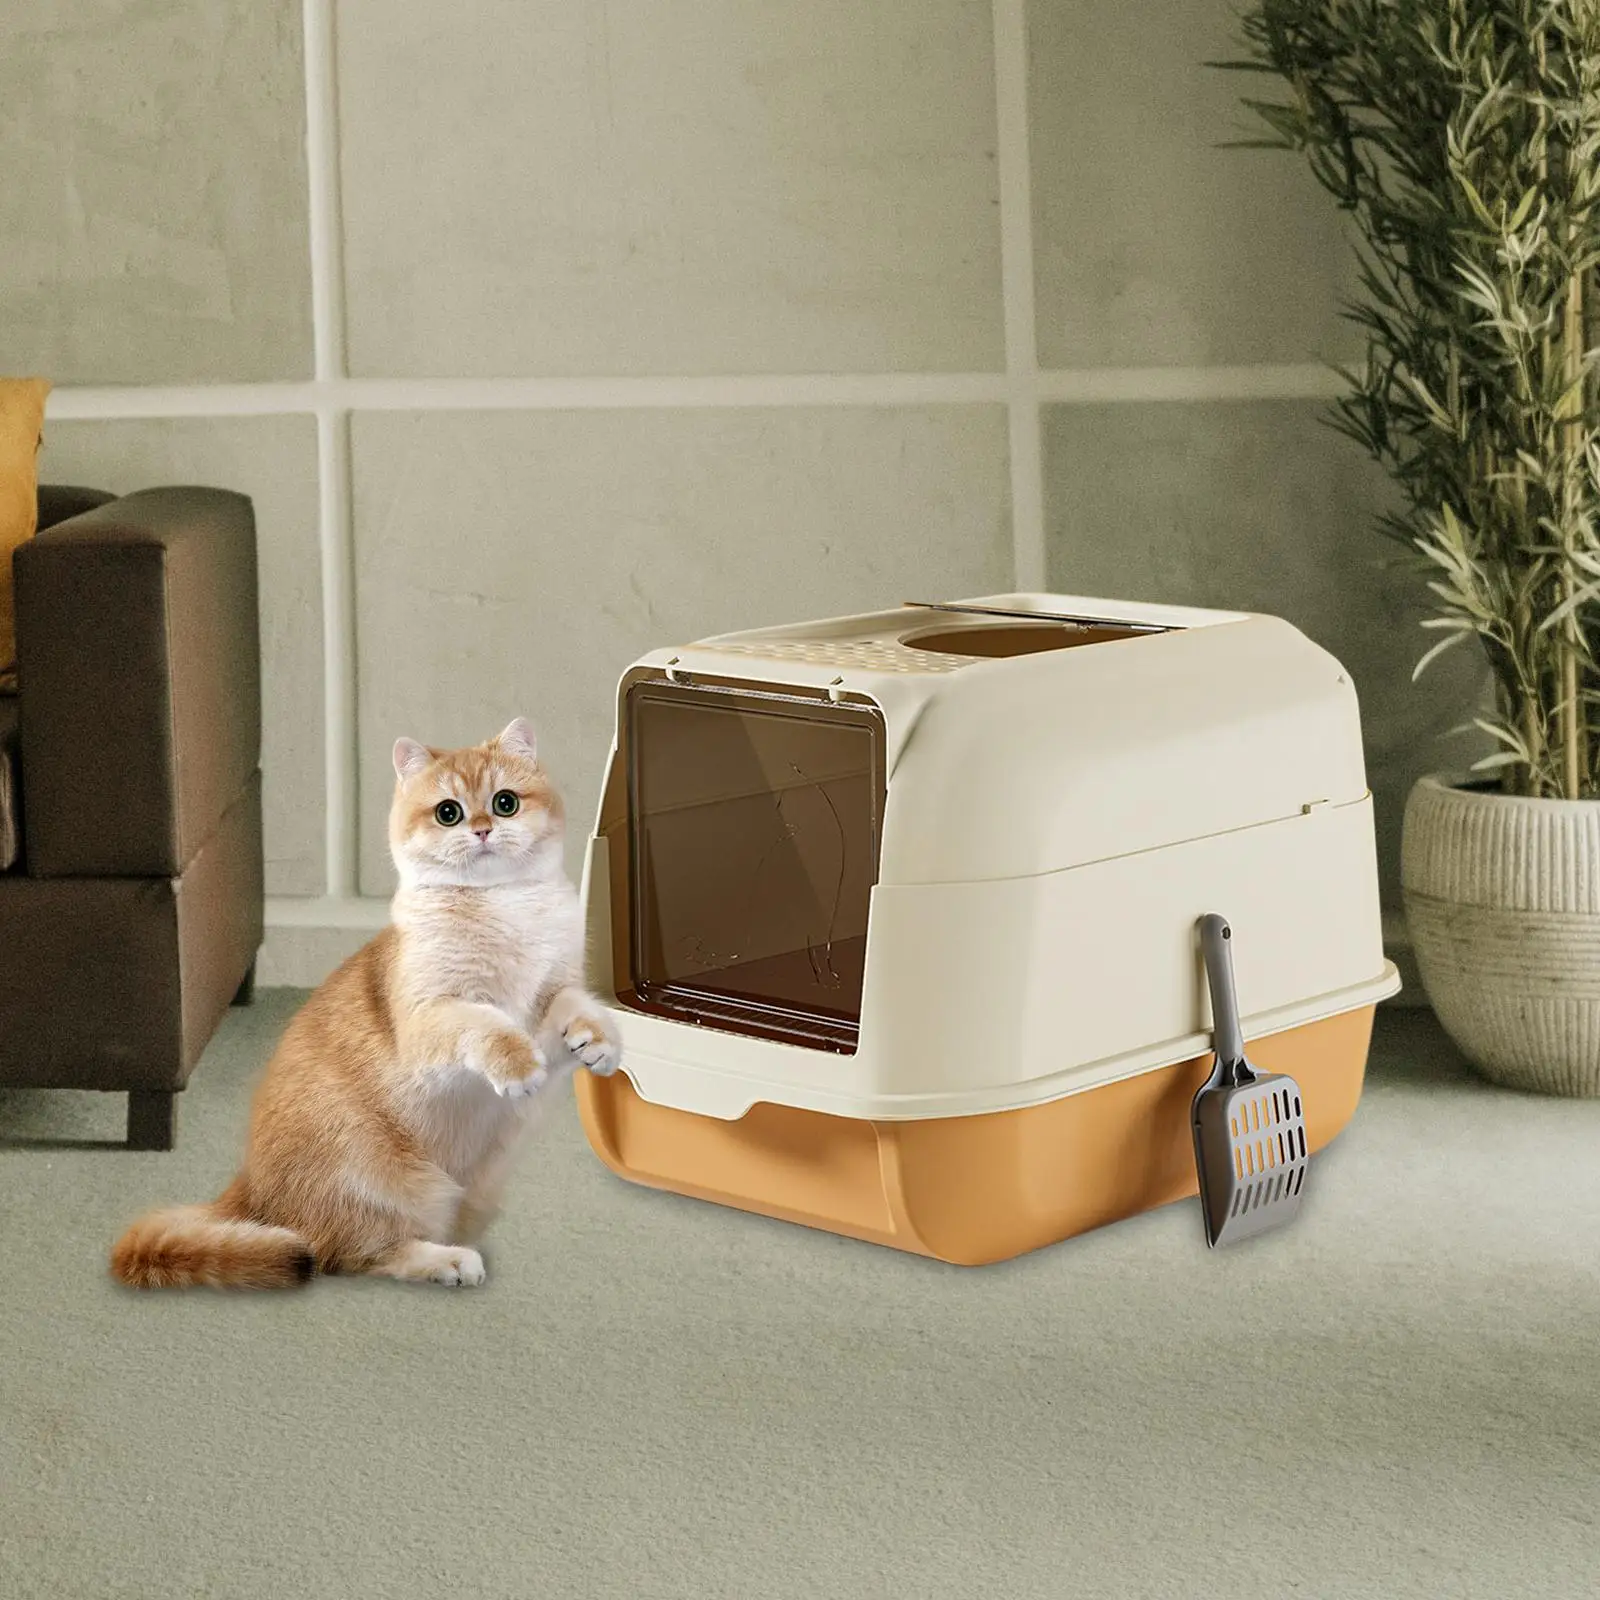 Cat Litter Box with Lid Enclosed Large Space Double Door Cat Litter Tray Cat Toilet Litter Pan for Growing Cats with Scooper